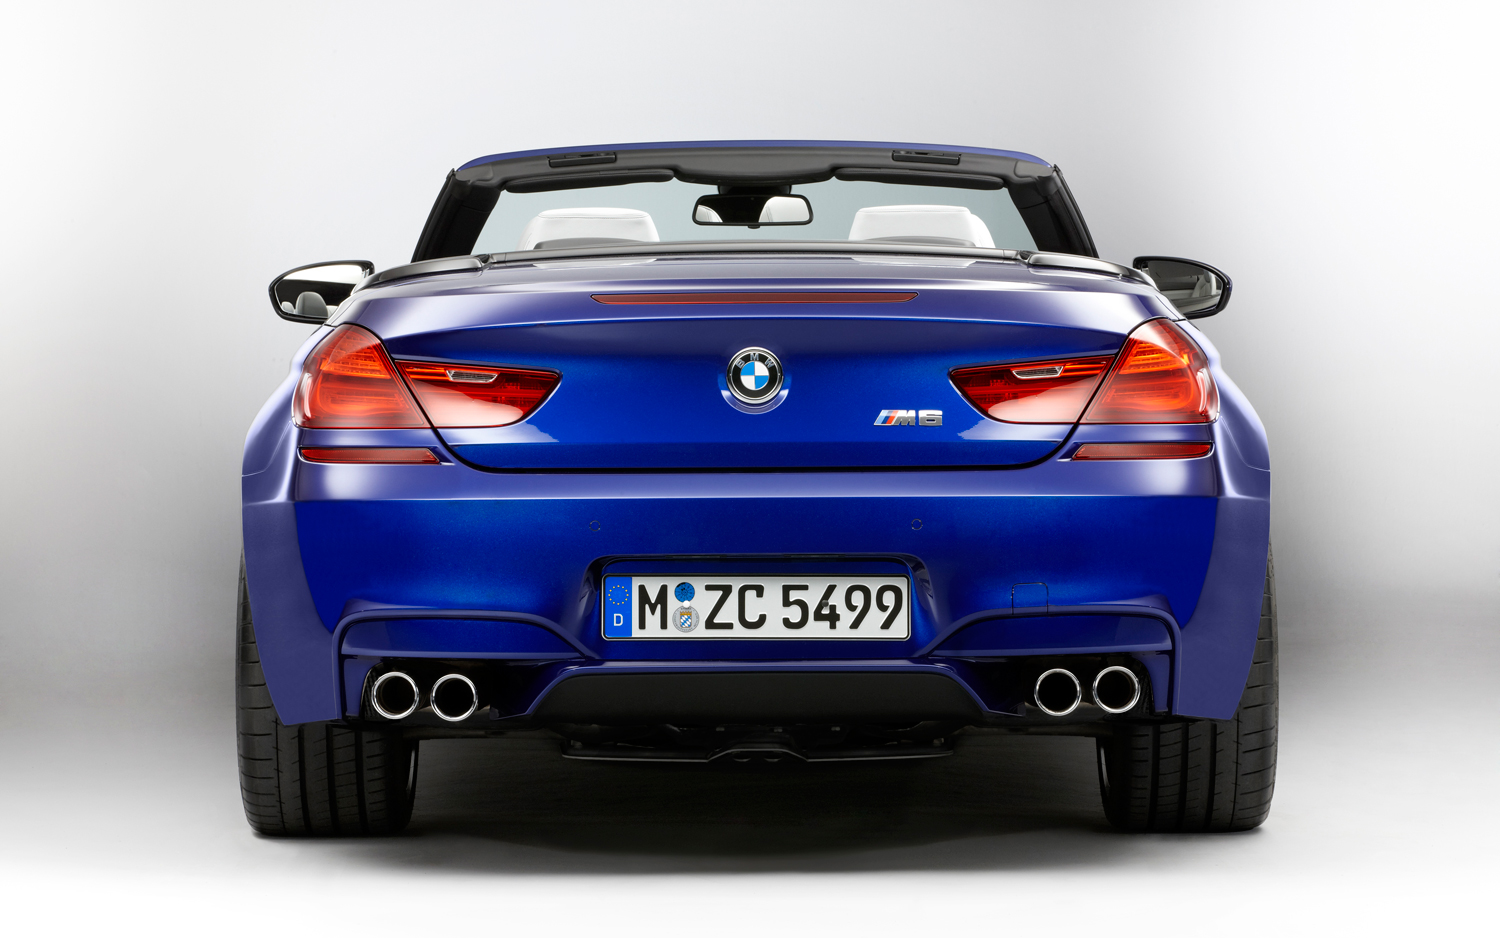 The BMW M6 Convertible Wallpapers For PC ~ BMW Automobiles